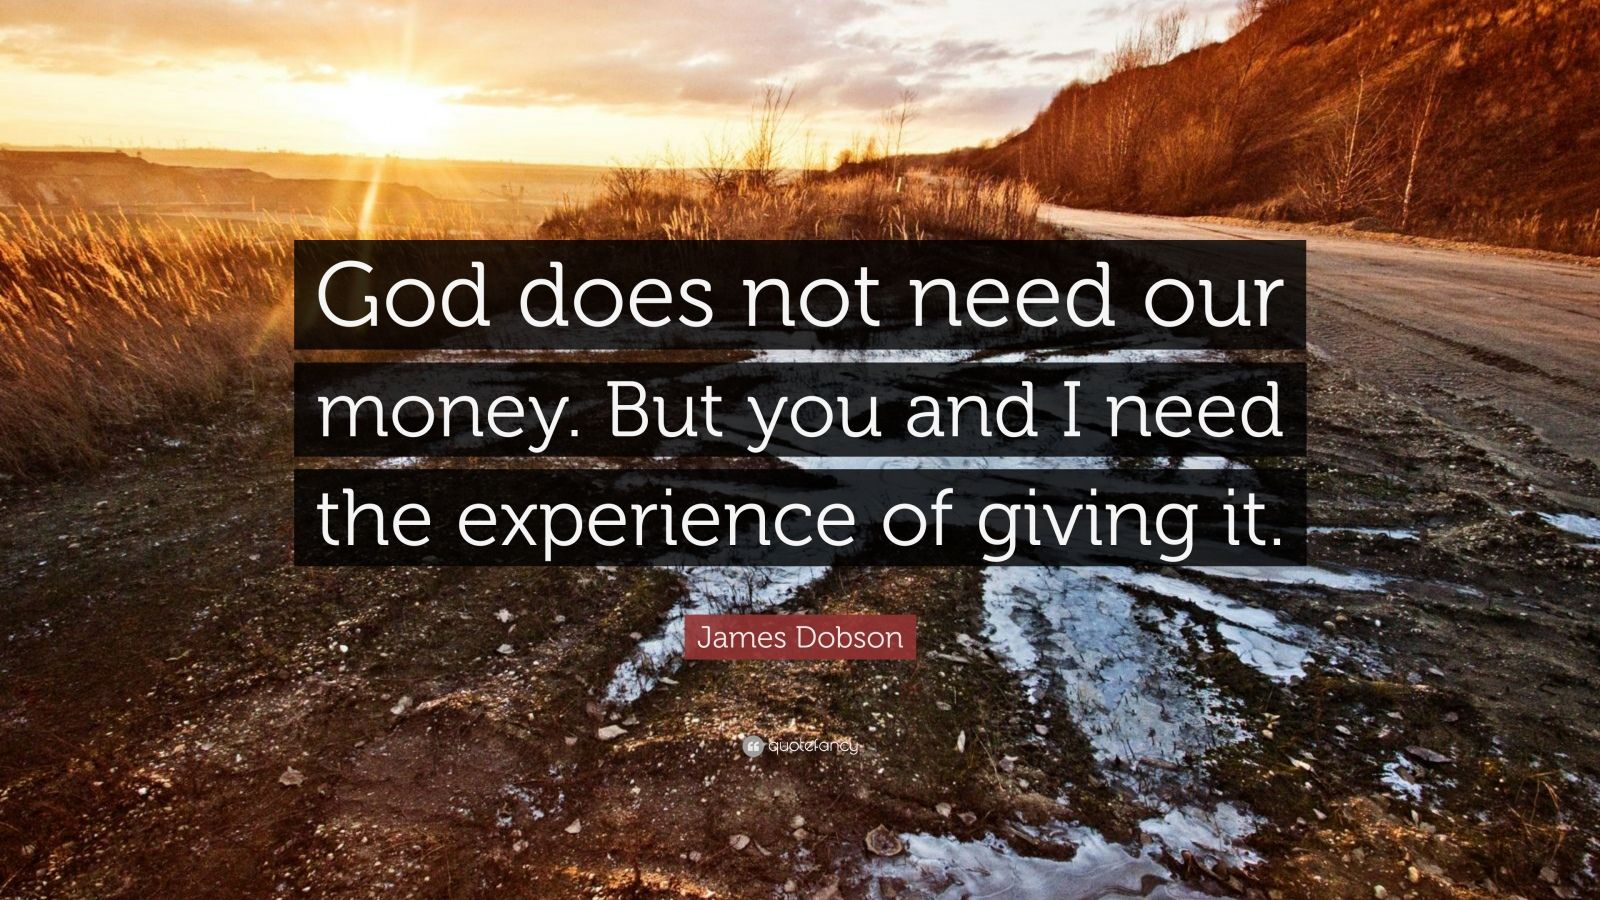 James Dobson Quote: “God does not need our money. But you and I need